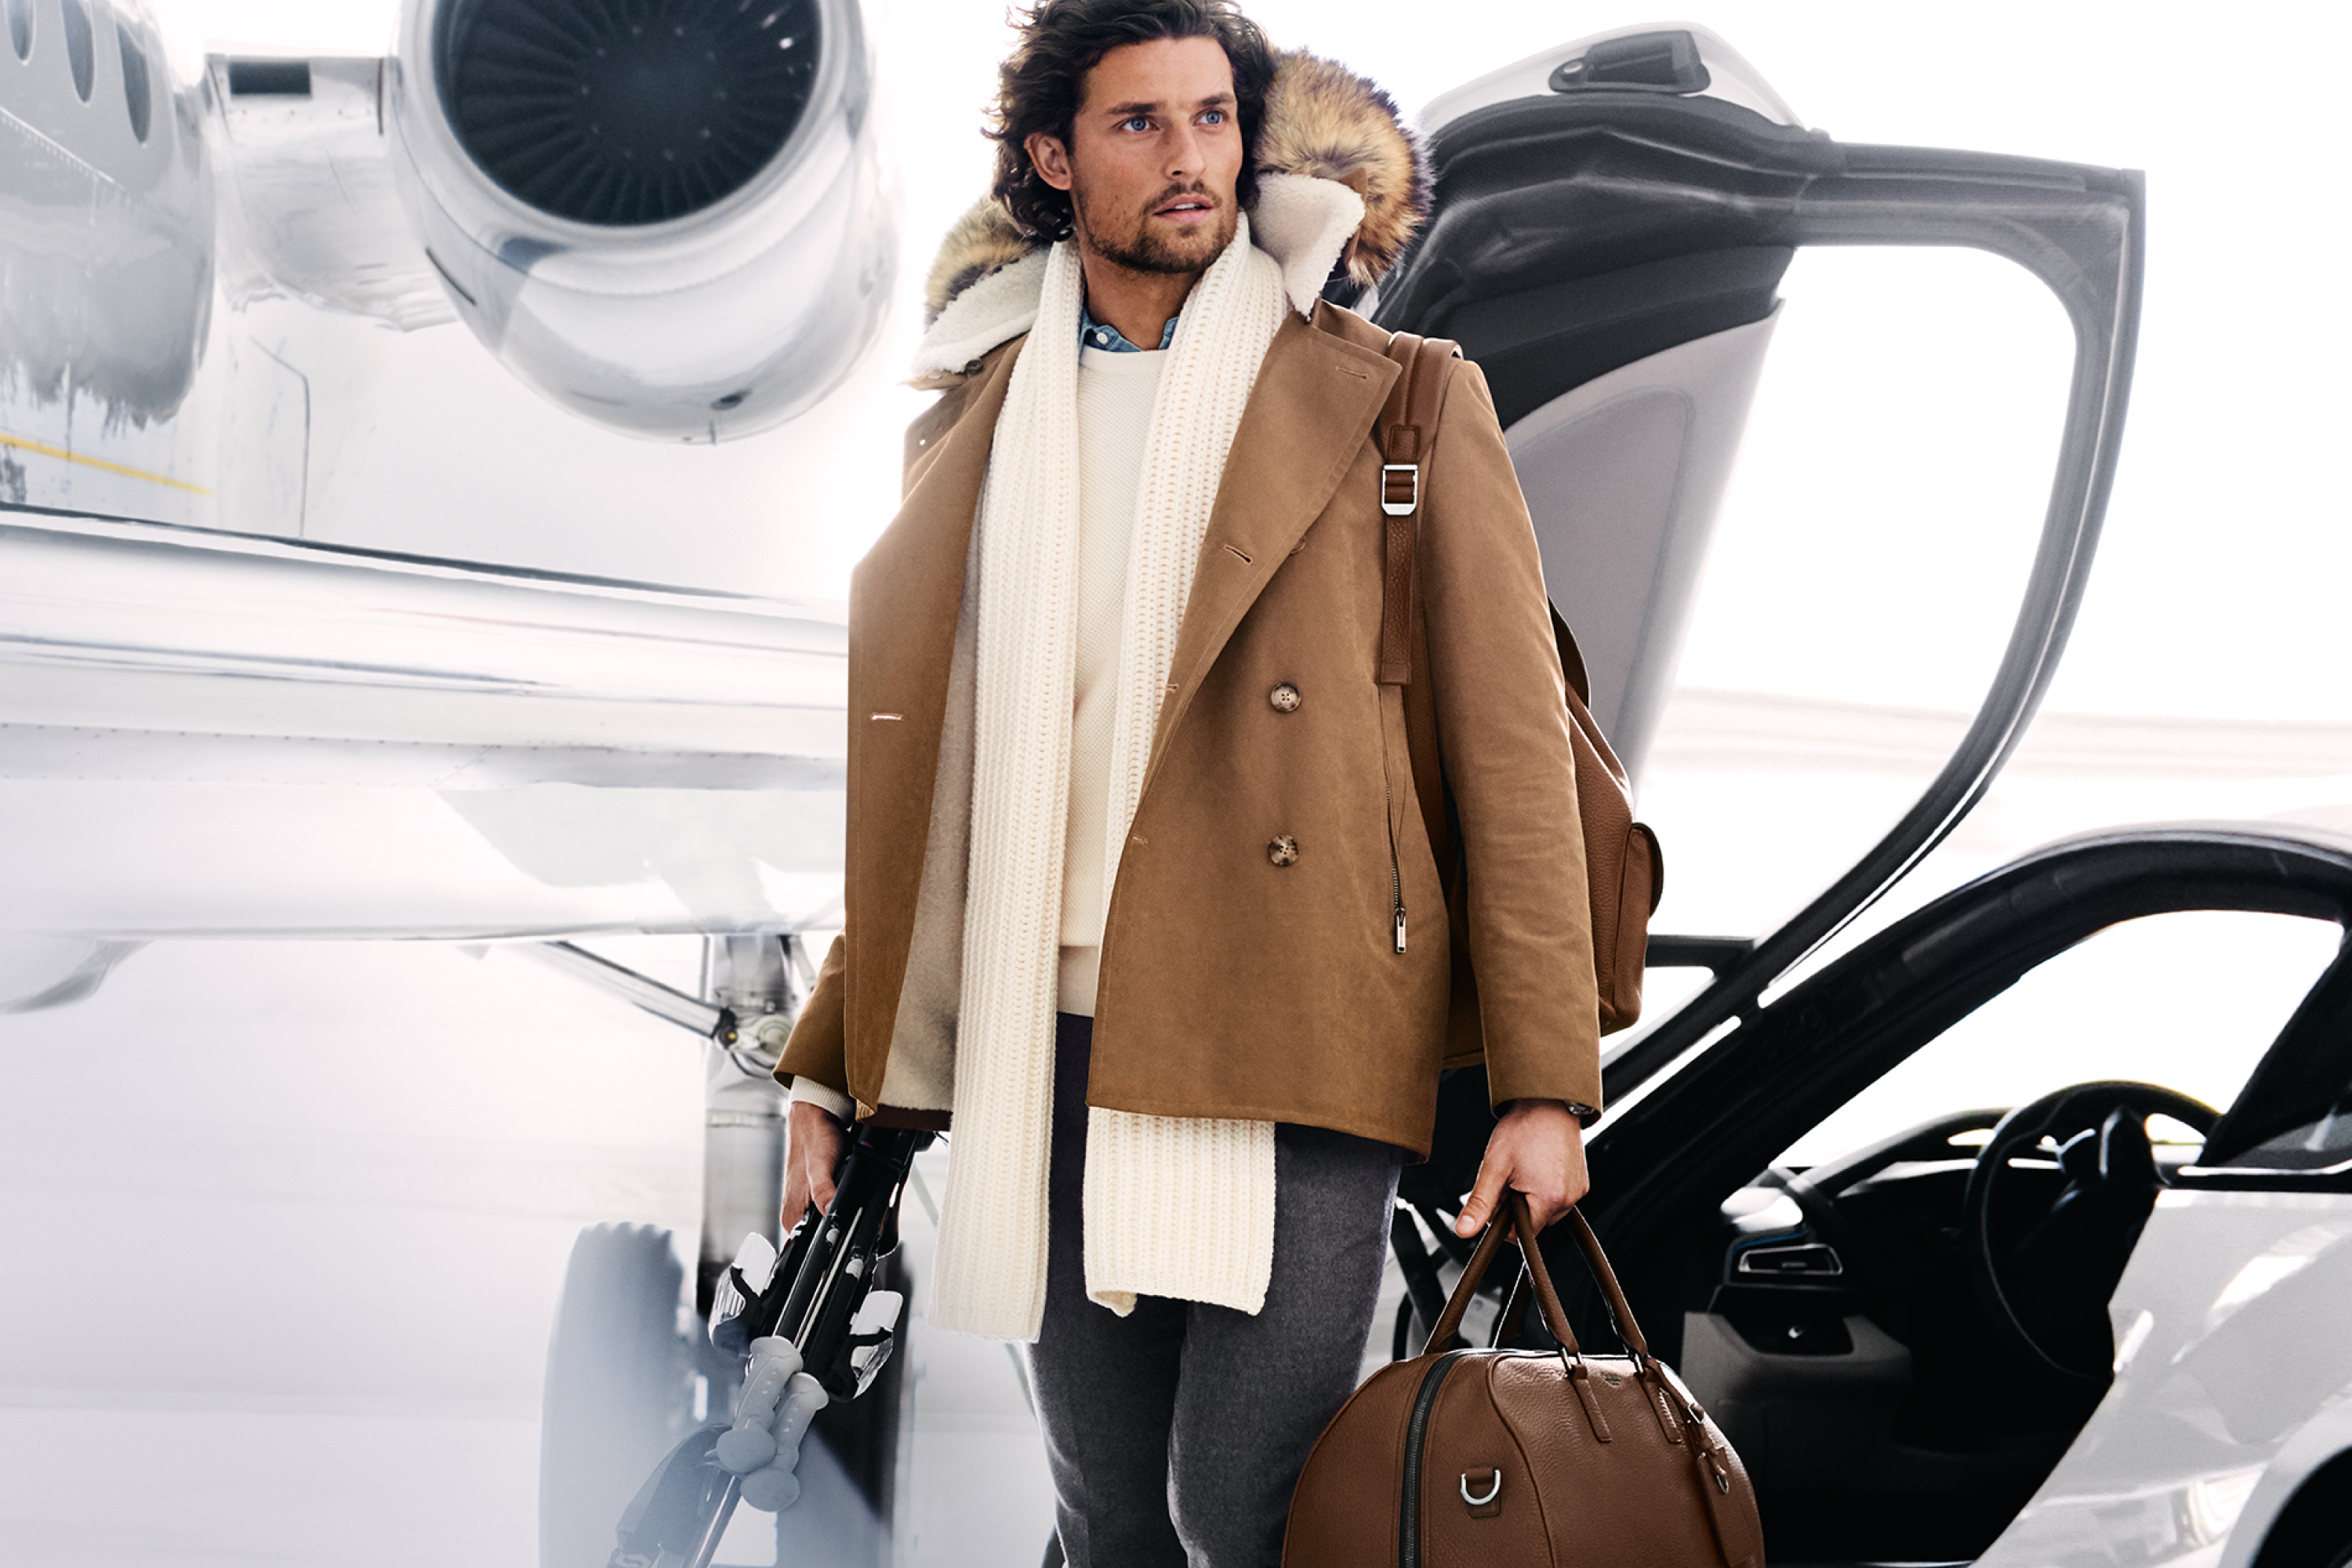 Michael Kors Unveils Fall 2016 Ad Campaigns - Daily Front Row